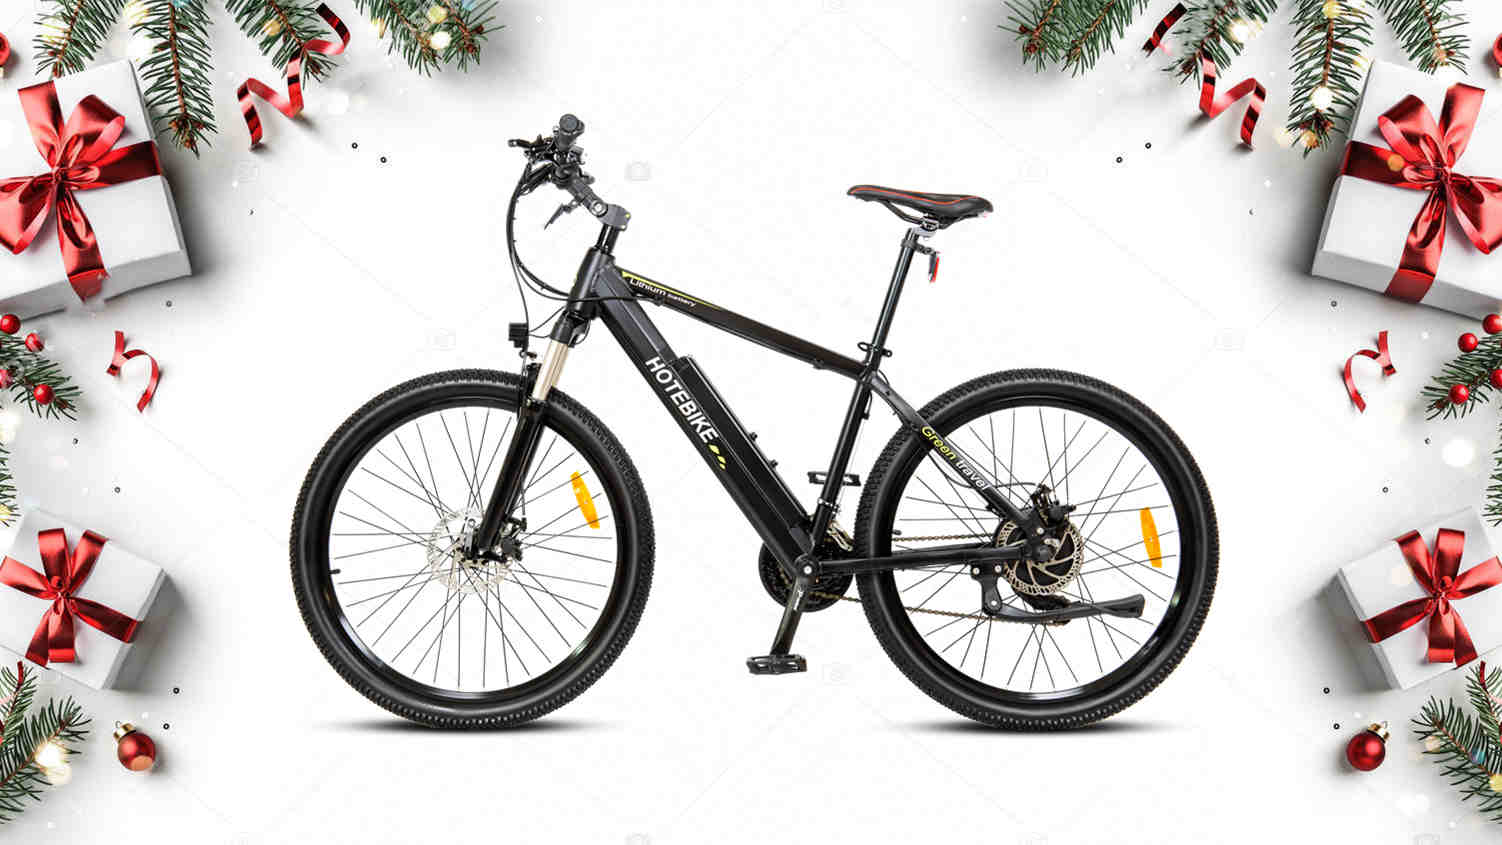 The Best Gift of Electric Bikes for Christmas - Blog - 2